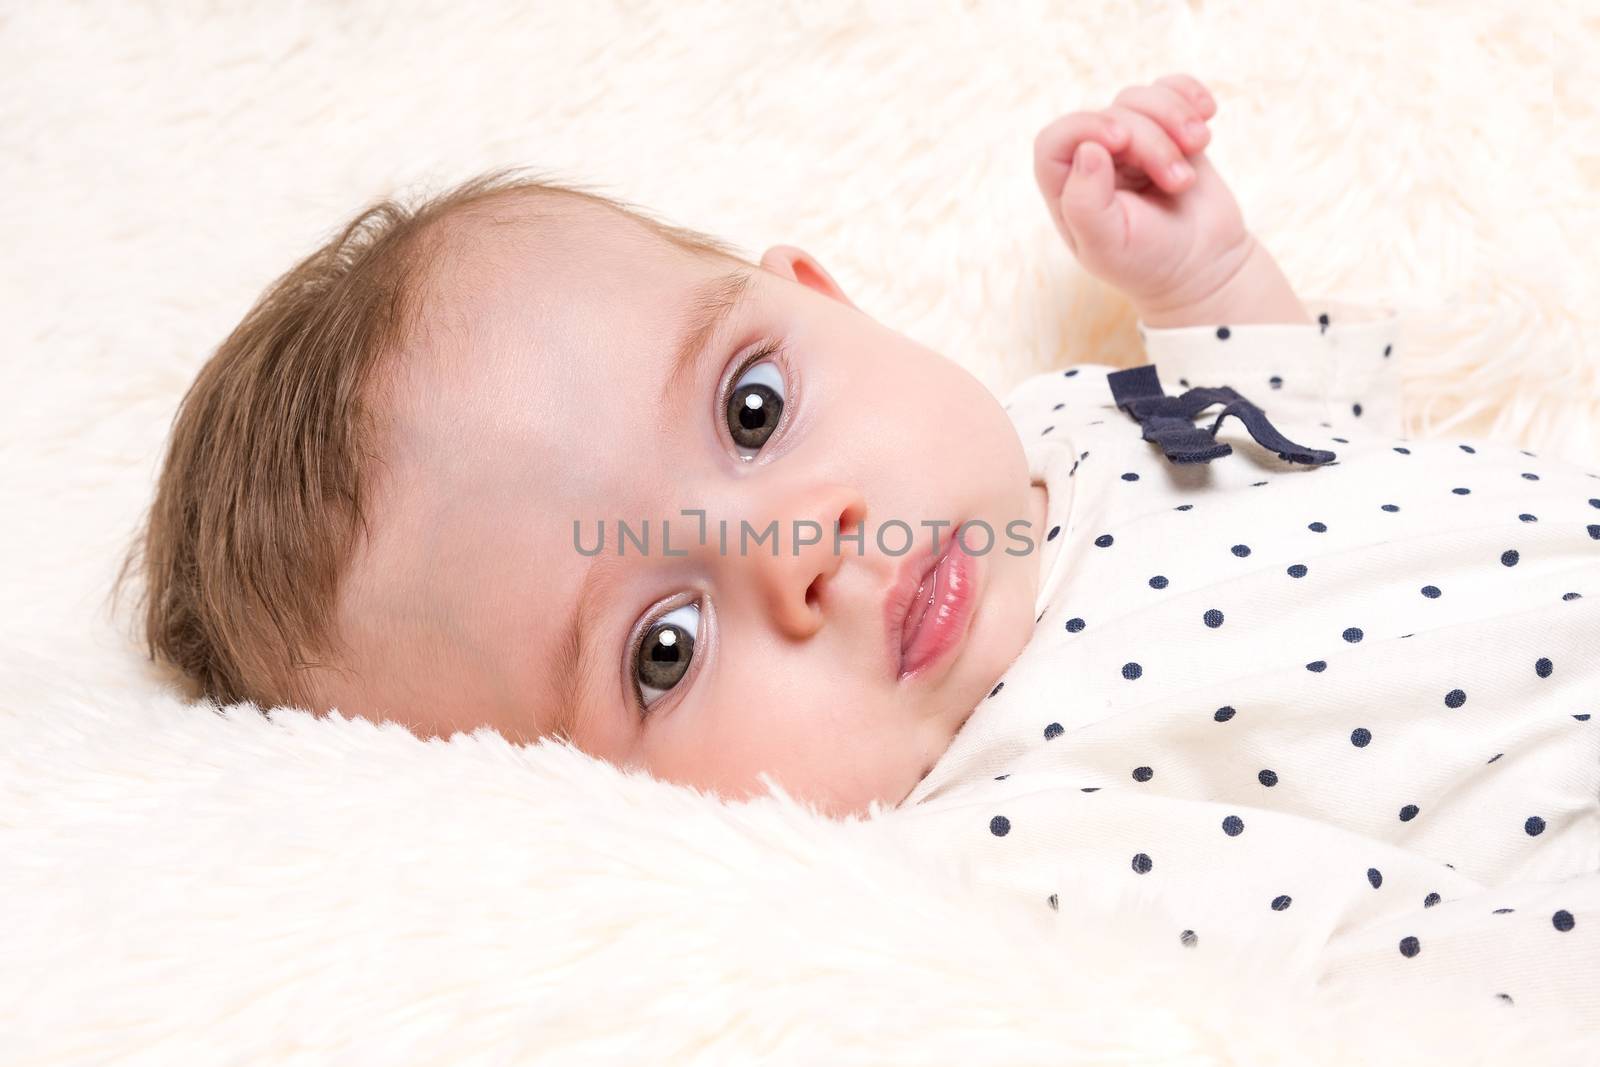 Portrait of Beautiful Baby Girl in Spotty Top resting on Cream Fur Rug